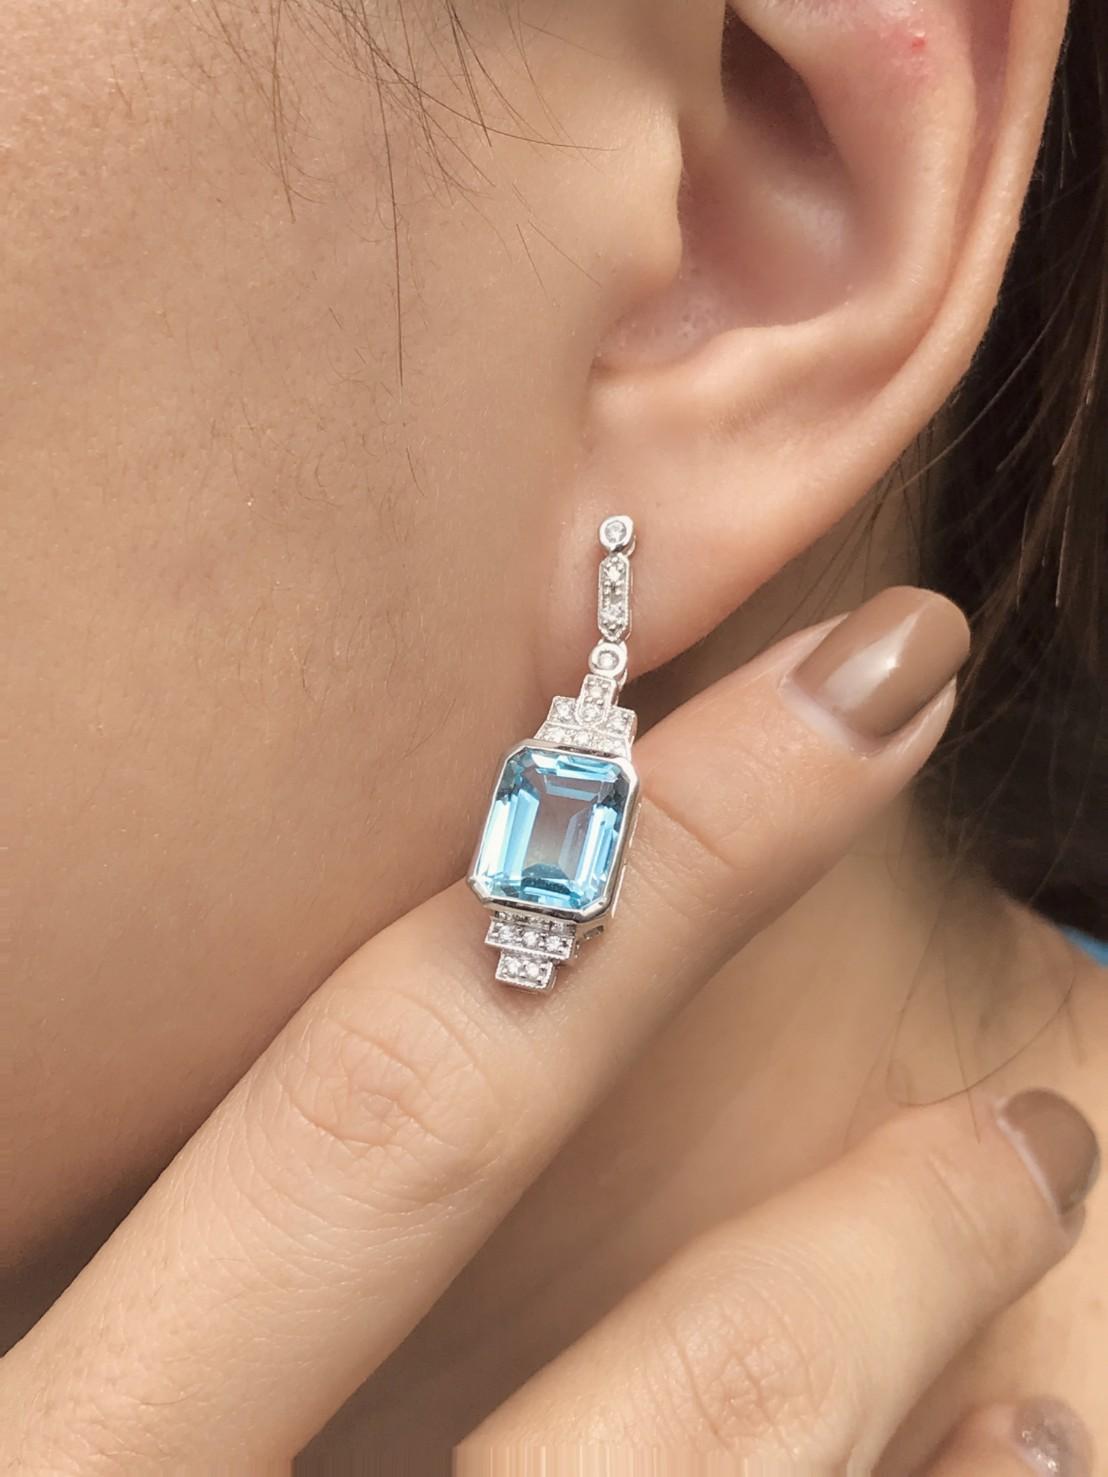 Express yourself with these insanely stylish, stunningly detail earrings with emerald cut blue topaz and diamonds in 9k white gold. Match them with your favorite outfit to complete your look. 

Information
Style: Art Deco
Metal: 9K White Gold
Width: